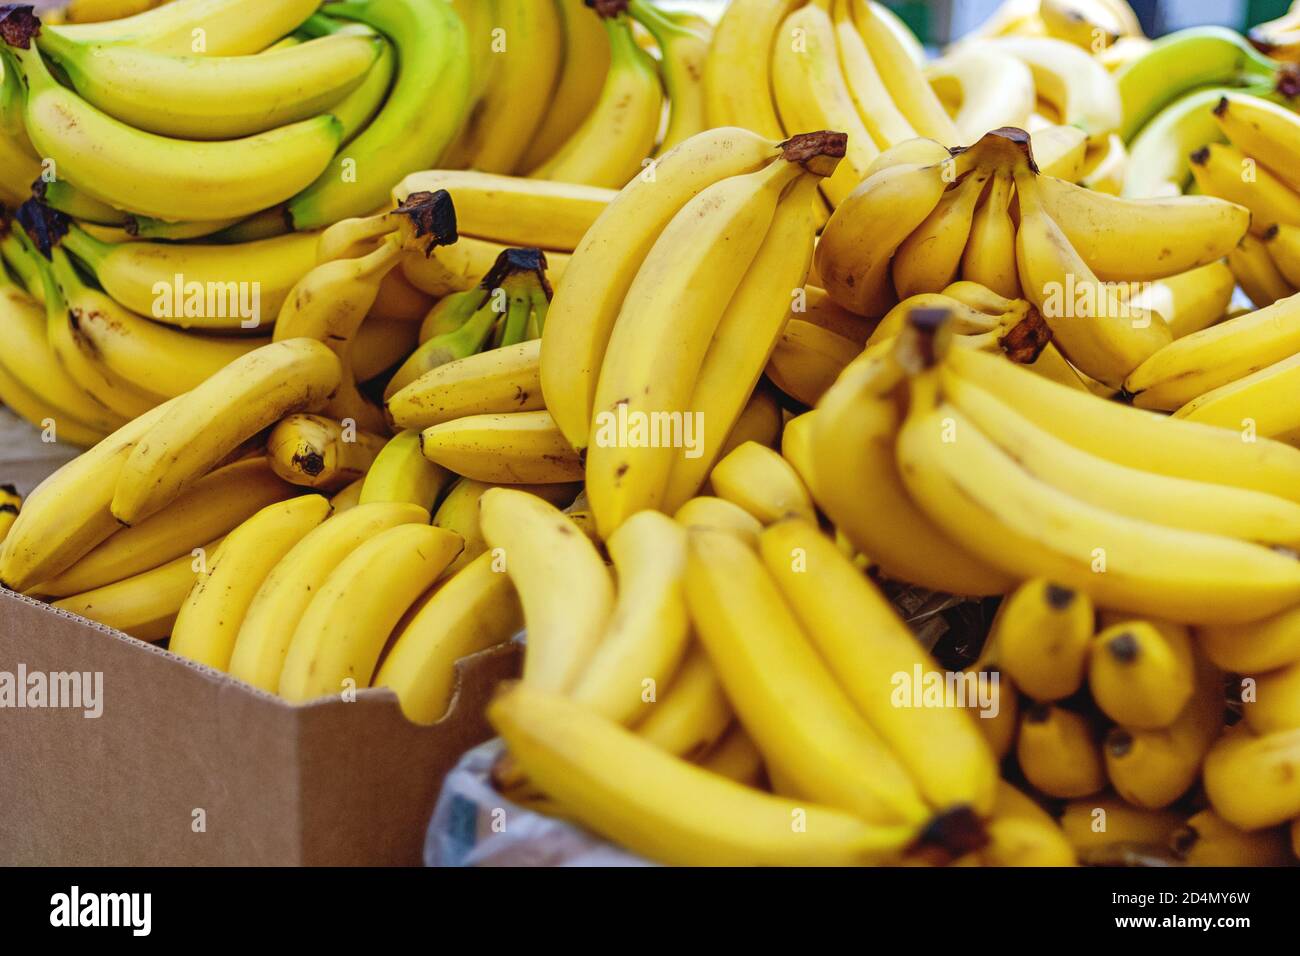 bananas in boxes sold in supermarket Stock Photo